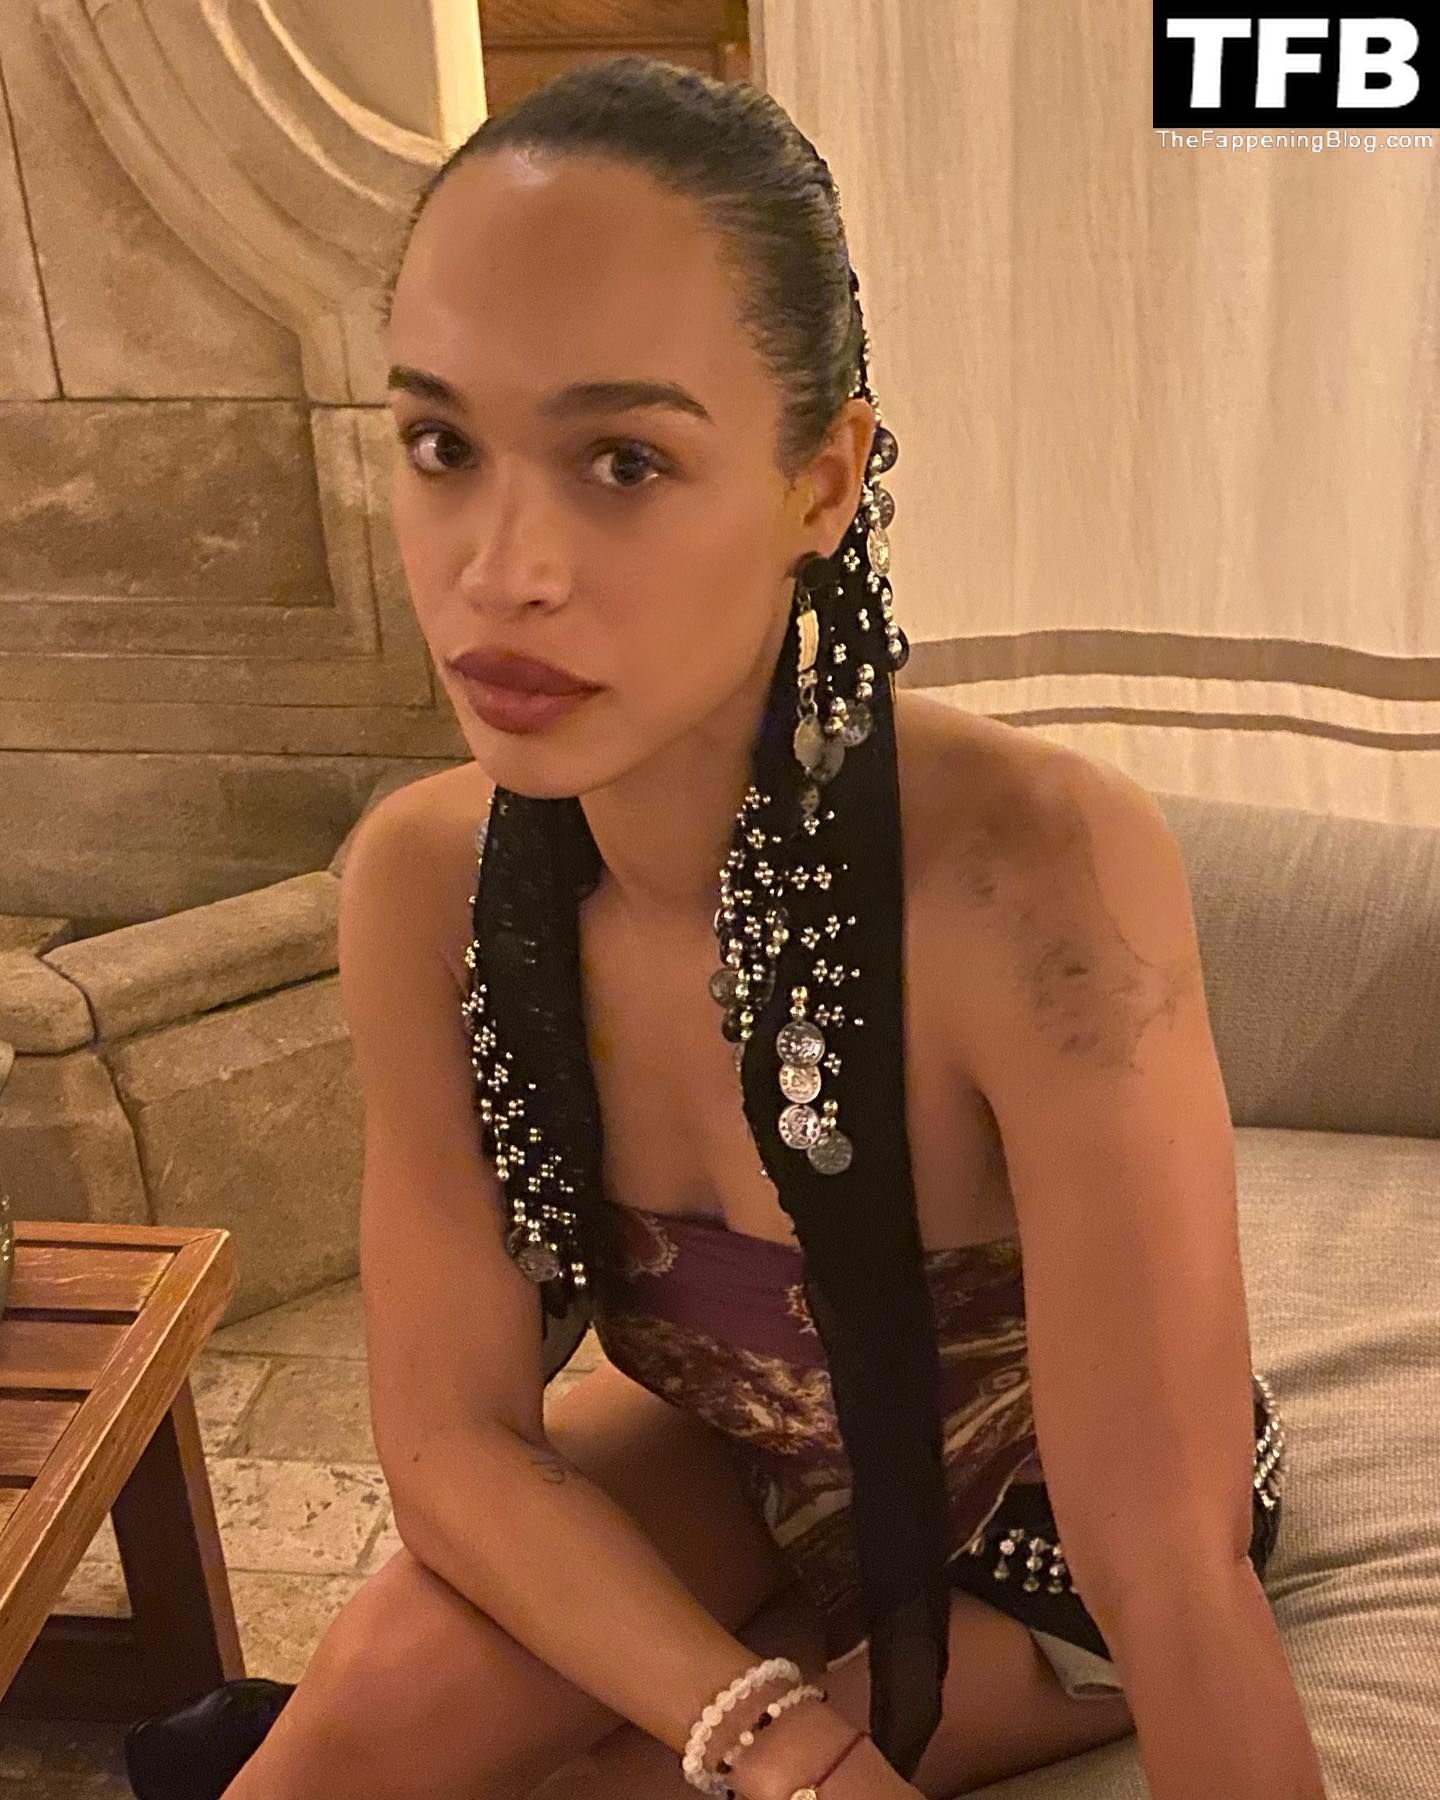 Cleopatra Coleman Sexy The Fappening Blog 4 - Cleopatra Coleman Sexy & Topless (8 Photos)